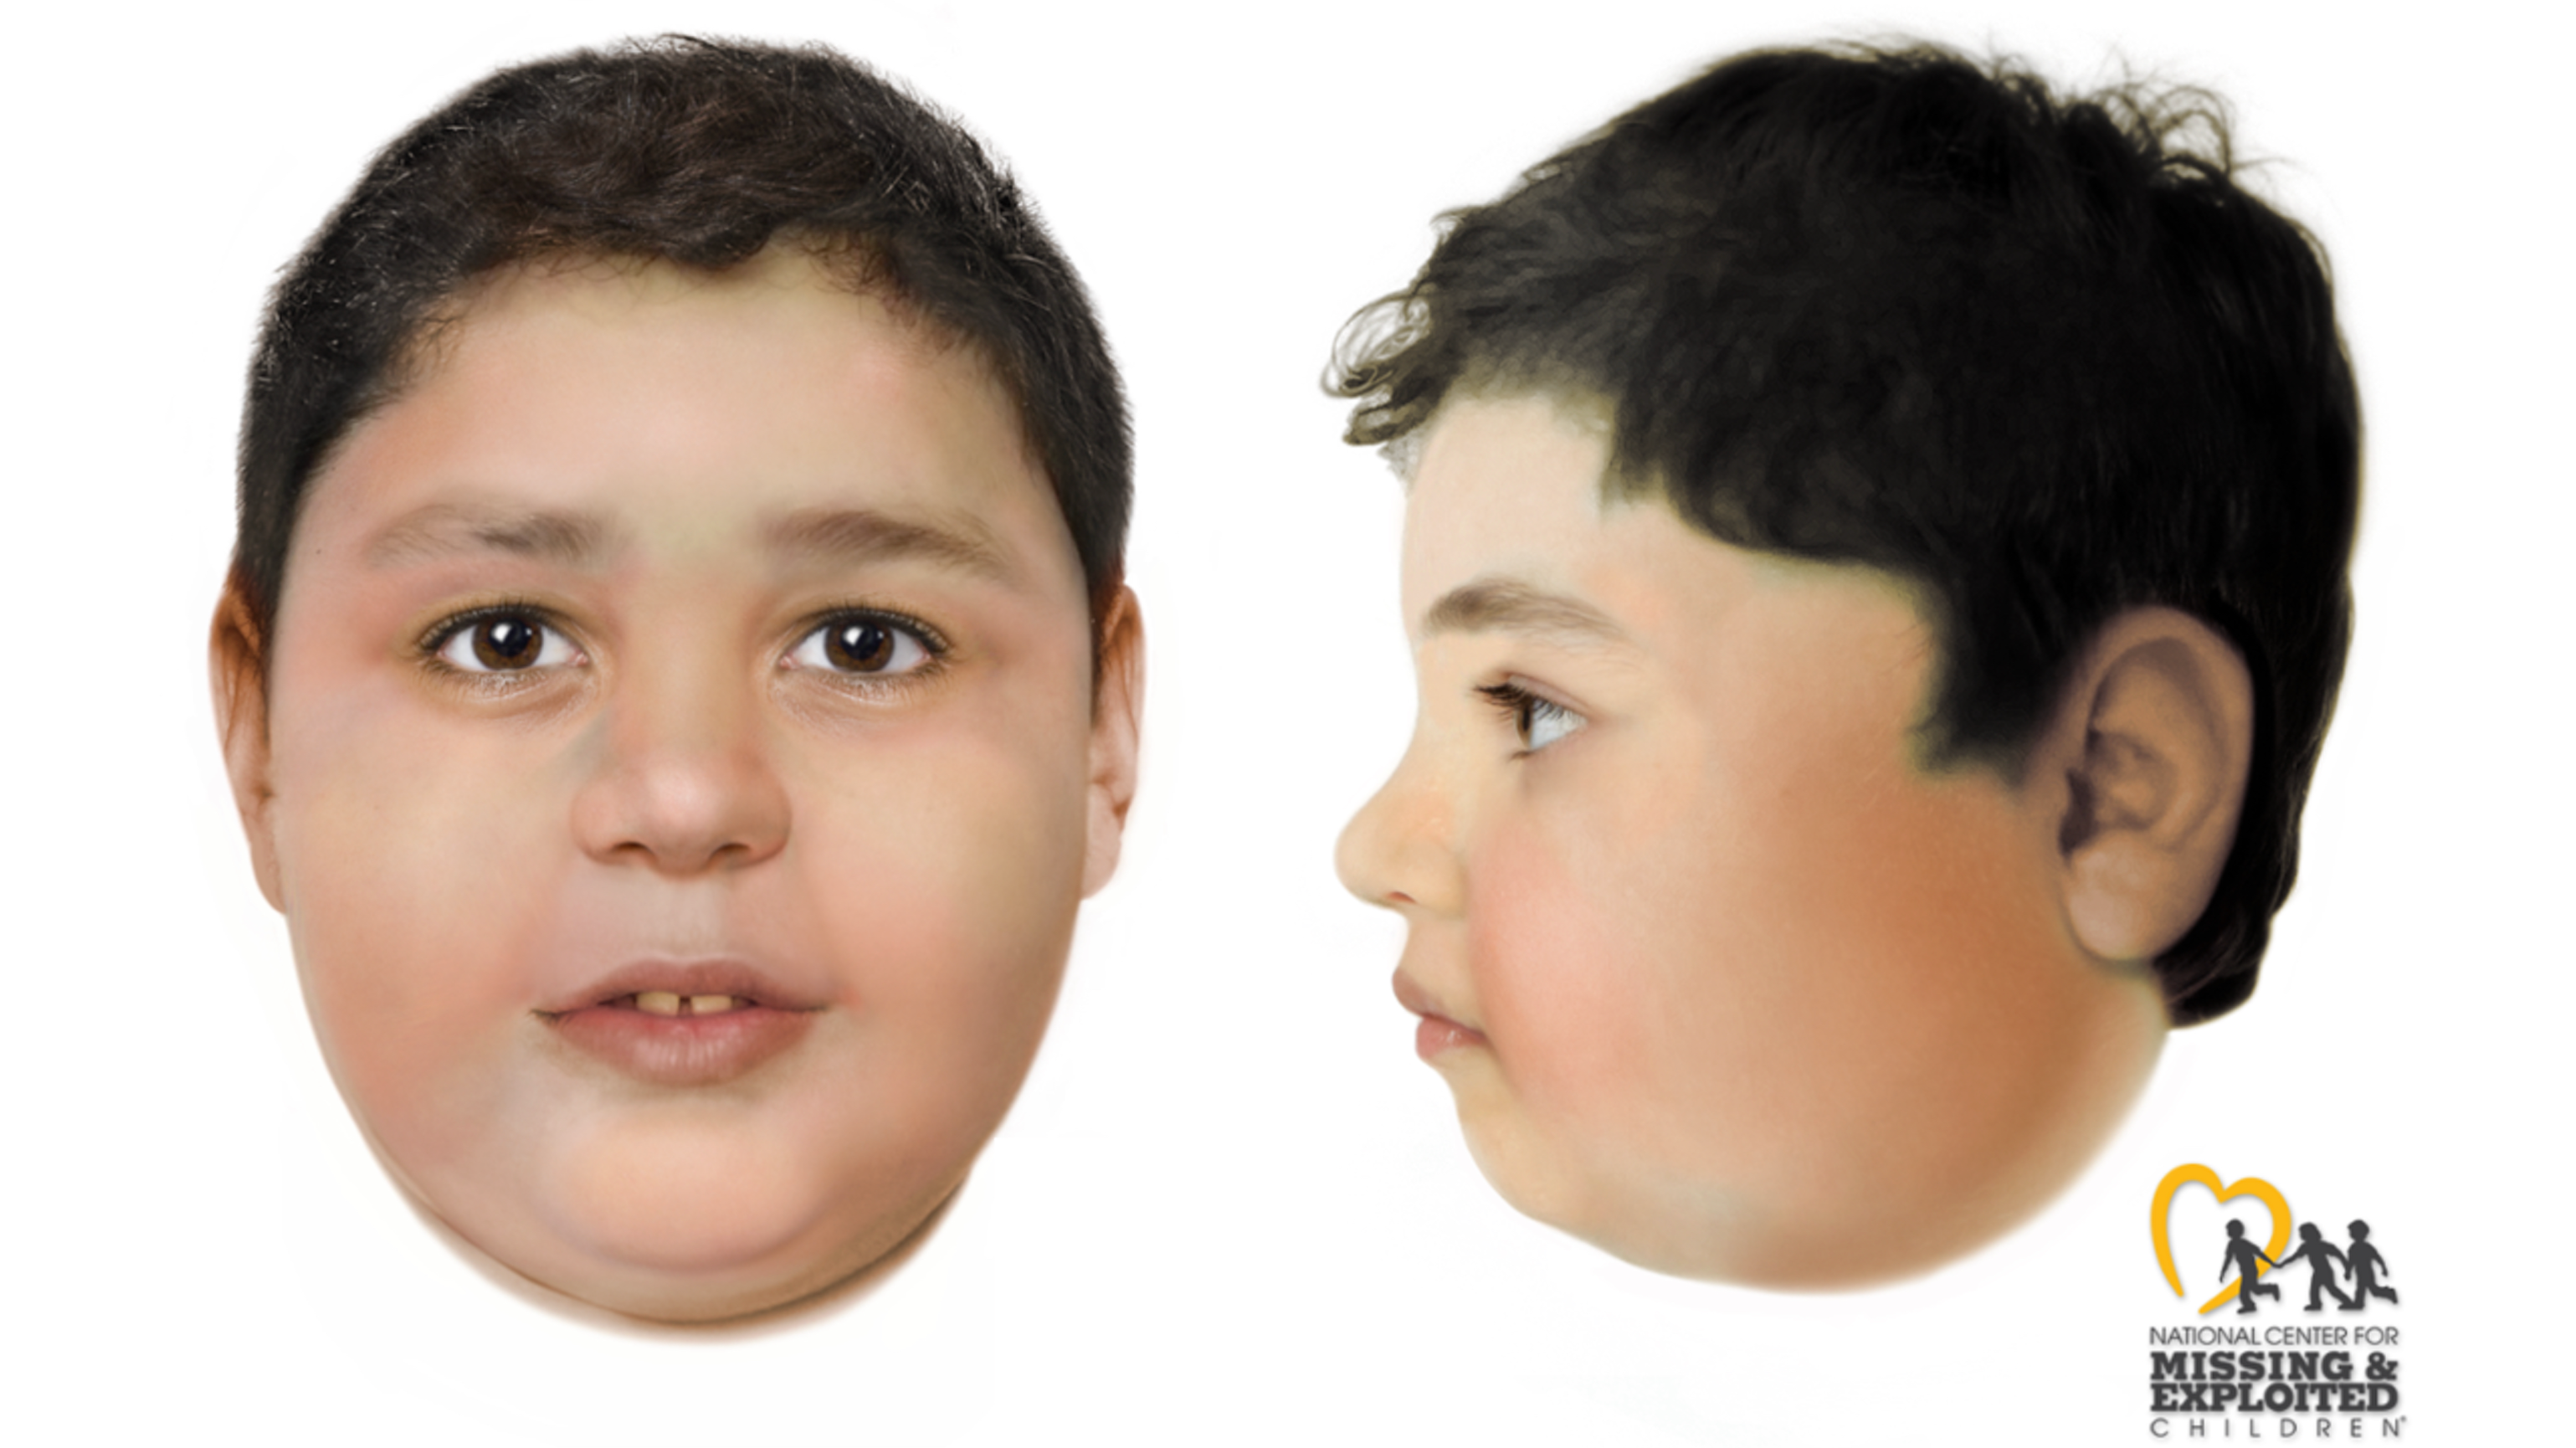 Las Vegas police have released these images of John ‘Little Zion’ Doe, a boy found dead near a Nevada hiking trail